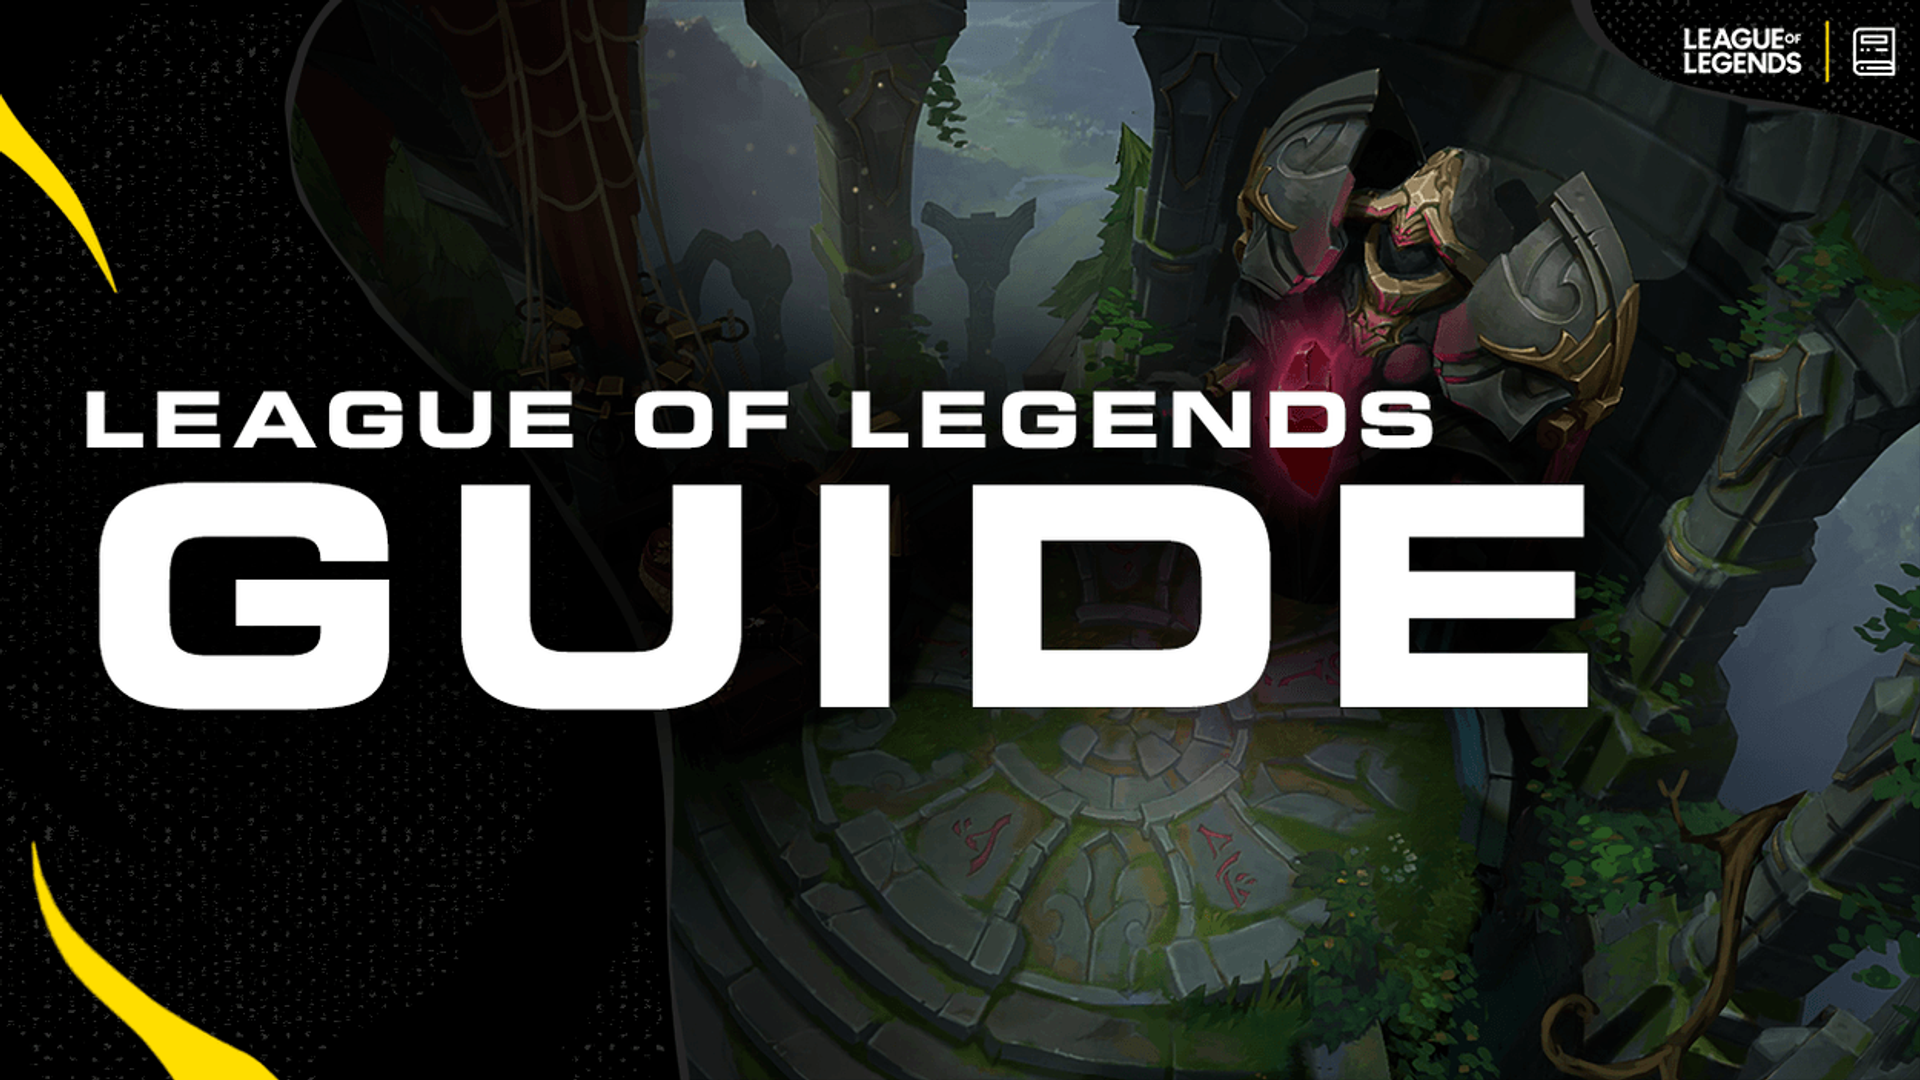 League of Legends beginner guide: All you need to know